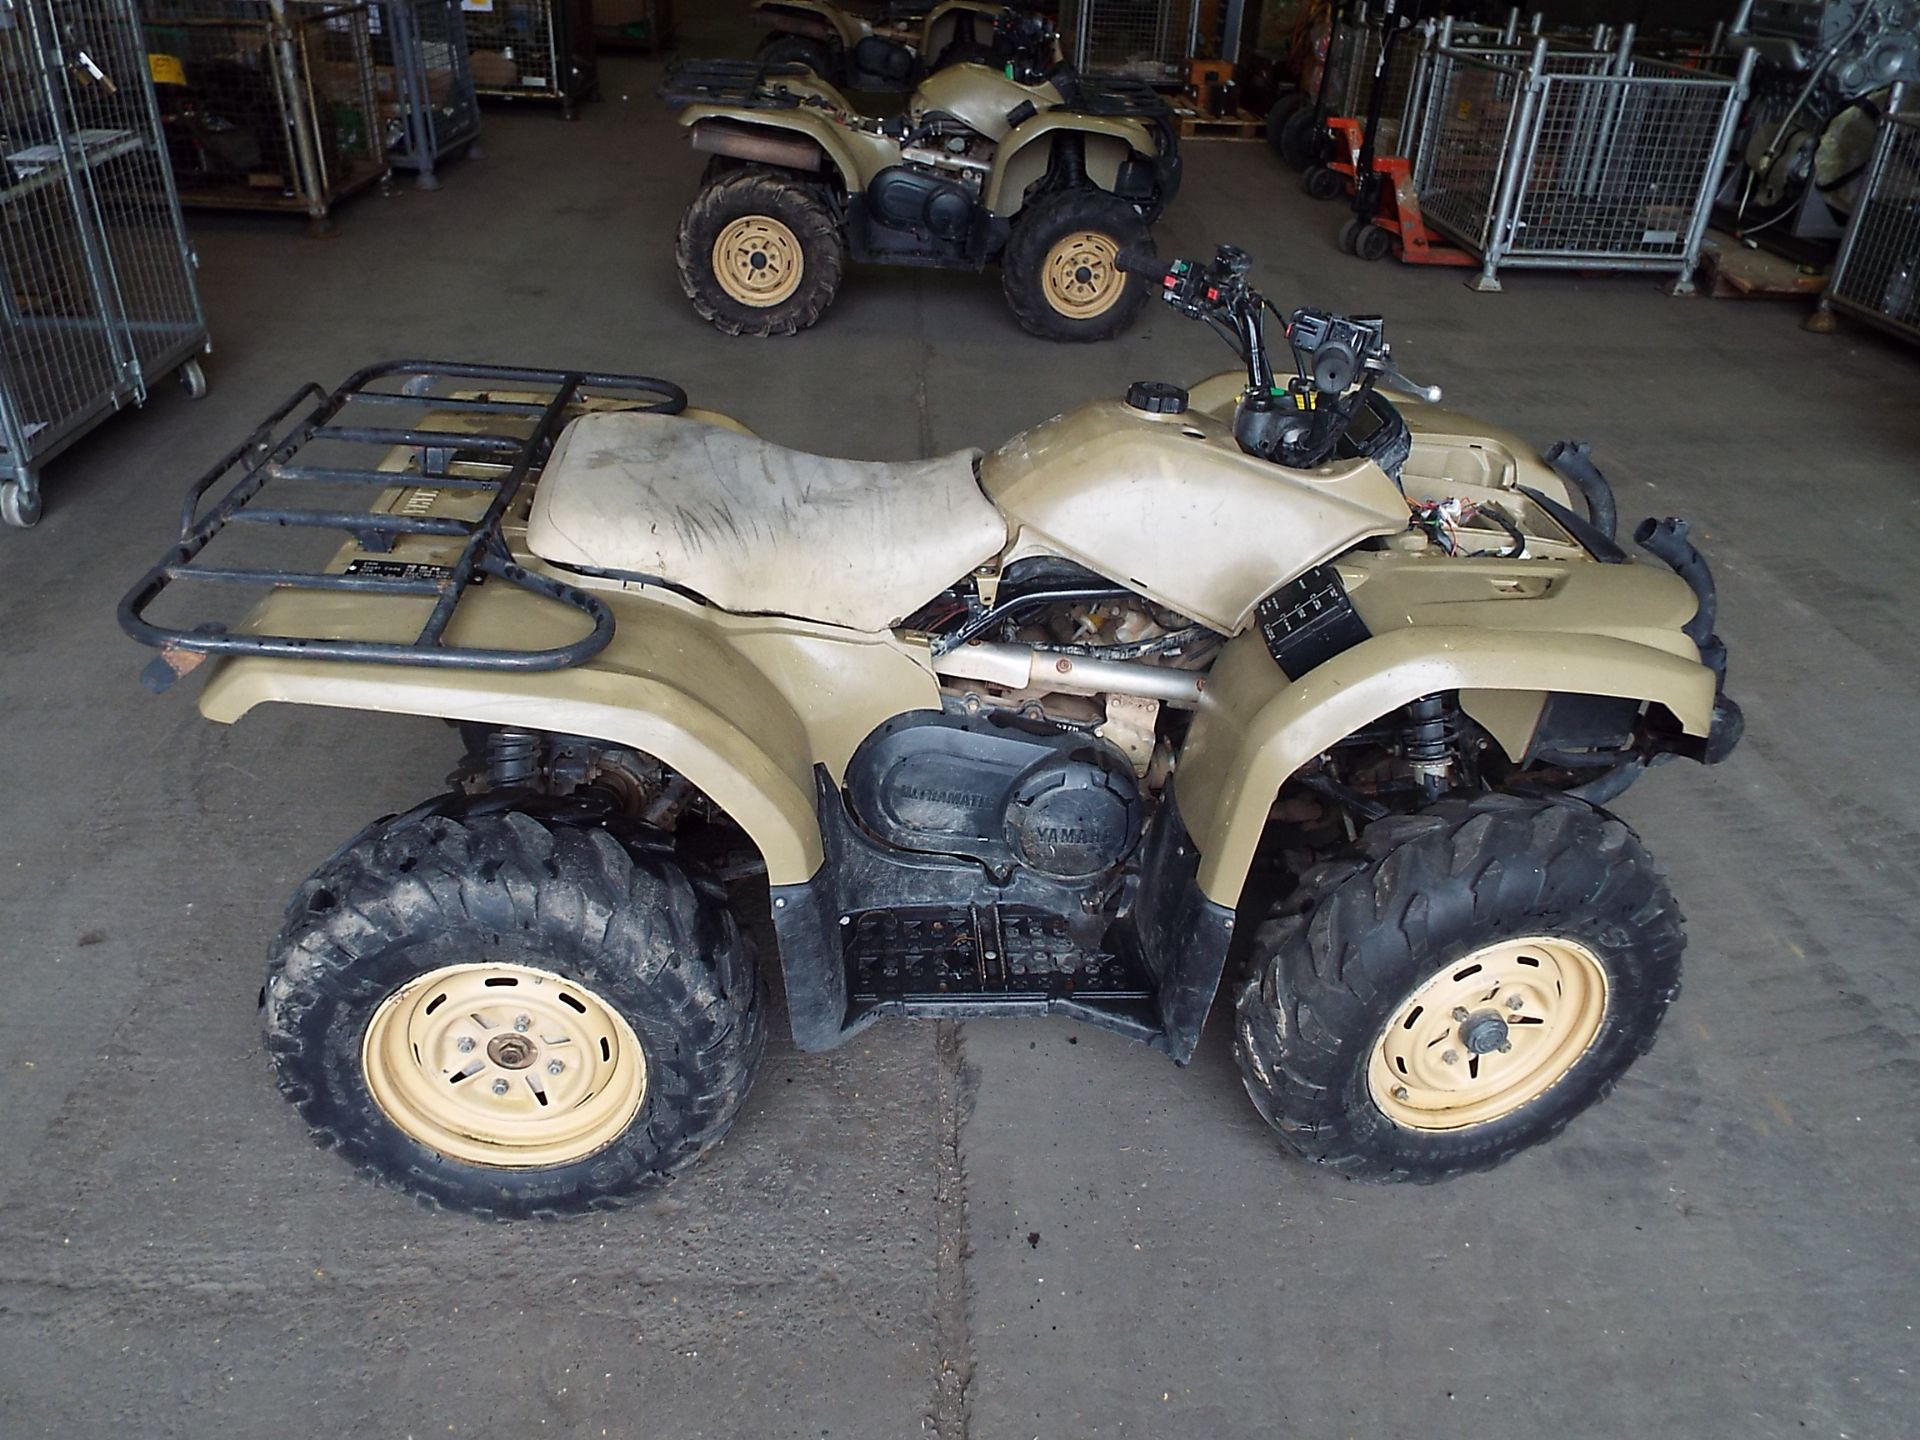 Military Specification Yamaha Grizzly 450 4 x 4 ATV Quad Bike - Image 3 of 19